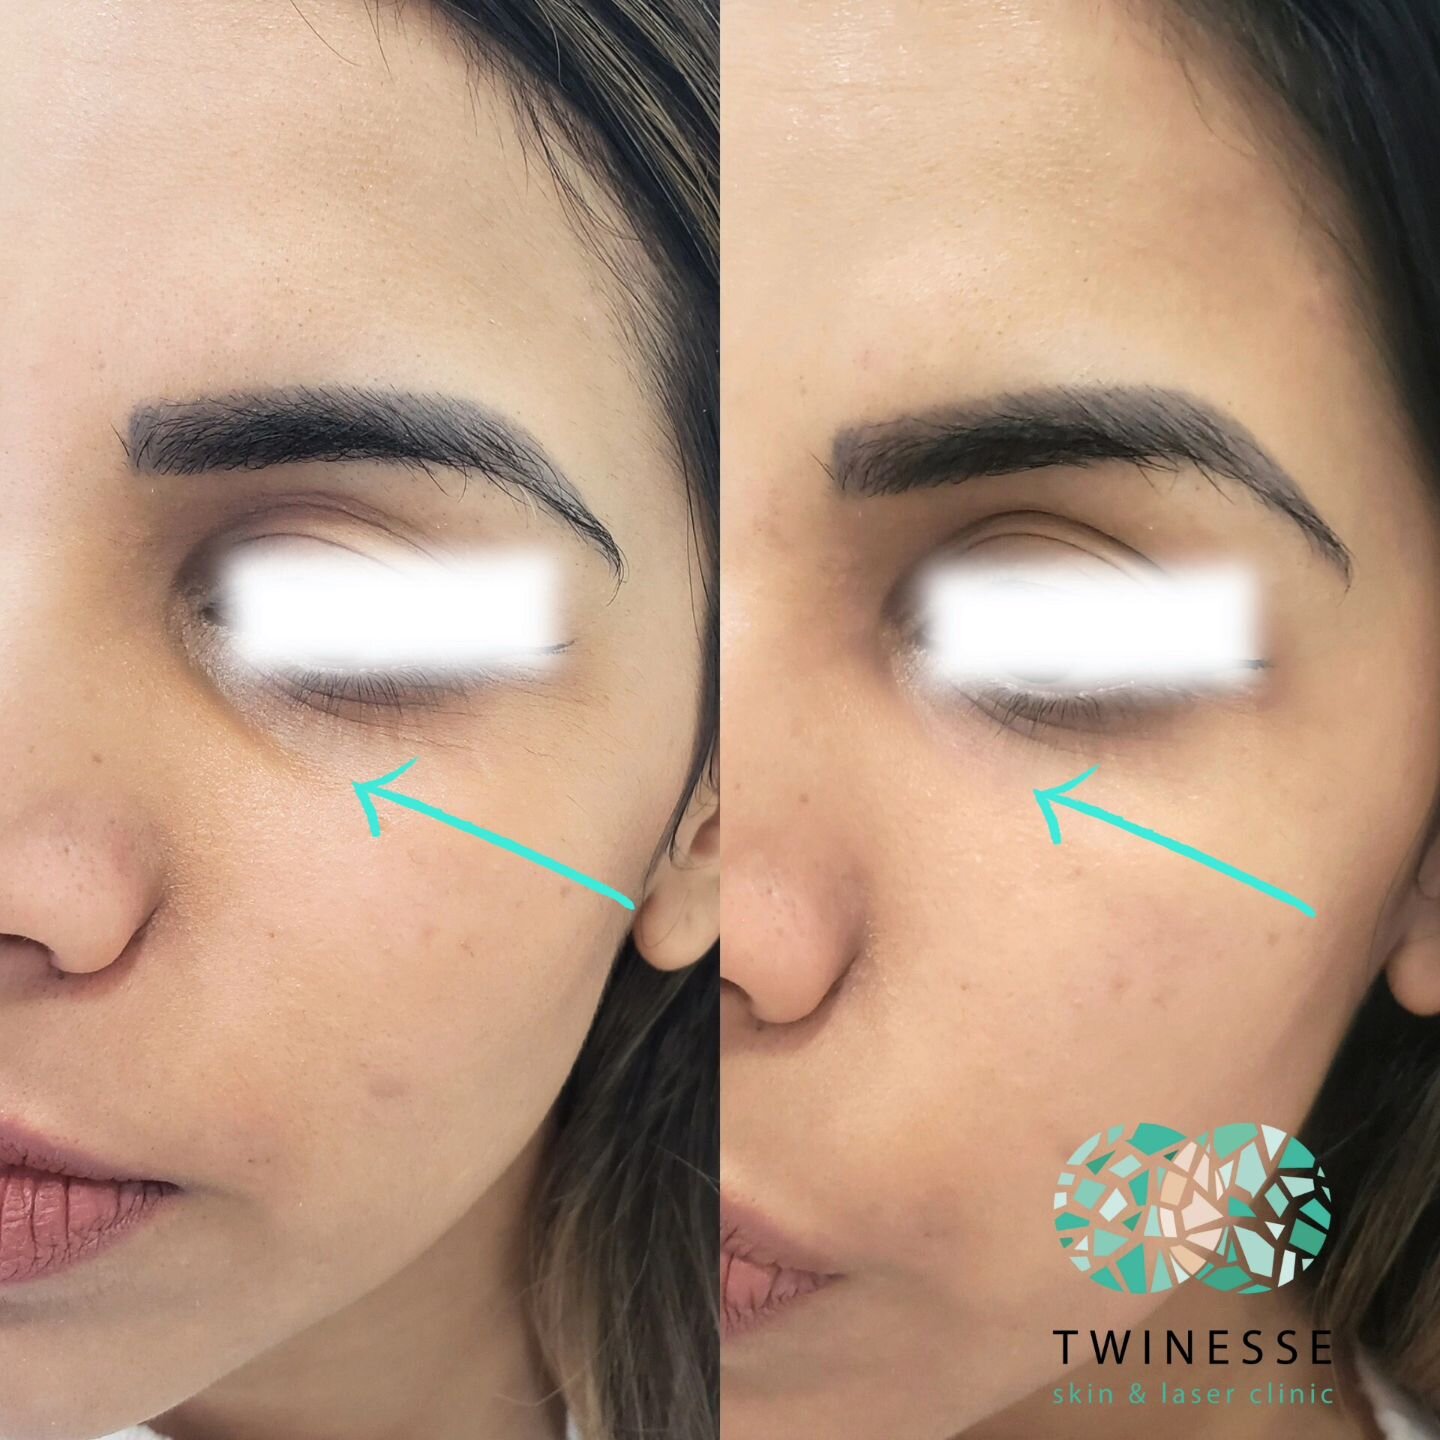 Are you tired of looking tired?! 👀 💉

Hollowness causes the eyes to look tired and aged, and is one of the most common complaints we get from clients. 

The most popular treatment is a tear trough filler. A very soft filler is carefully used to fil